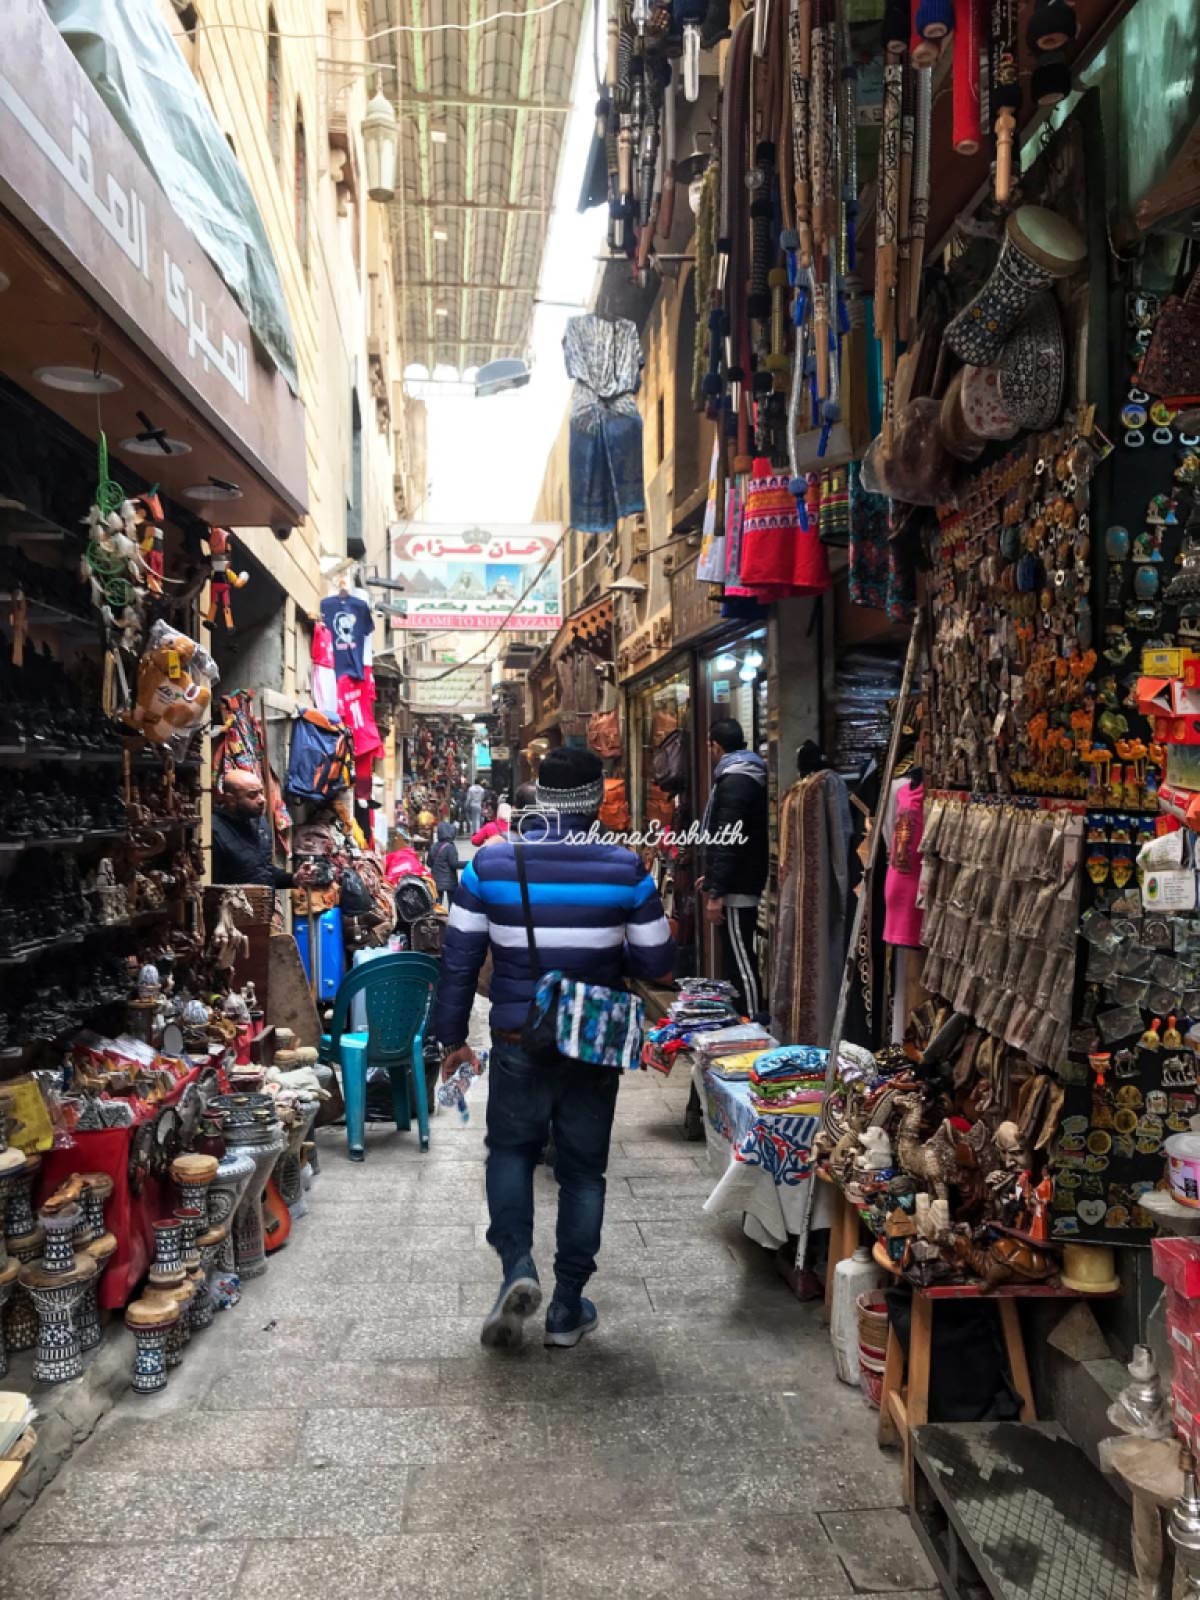 Indian traveller walking in the narrow alleys with shops on either side